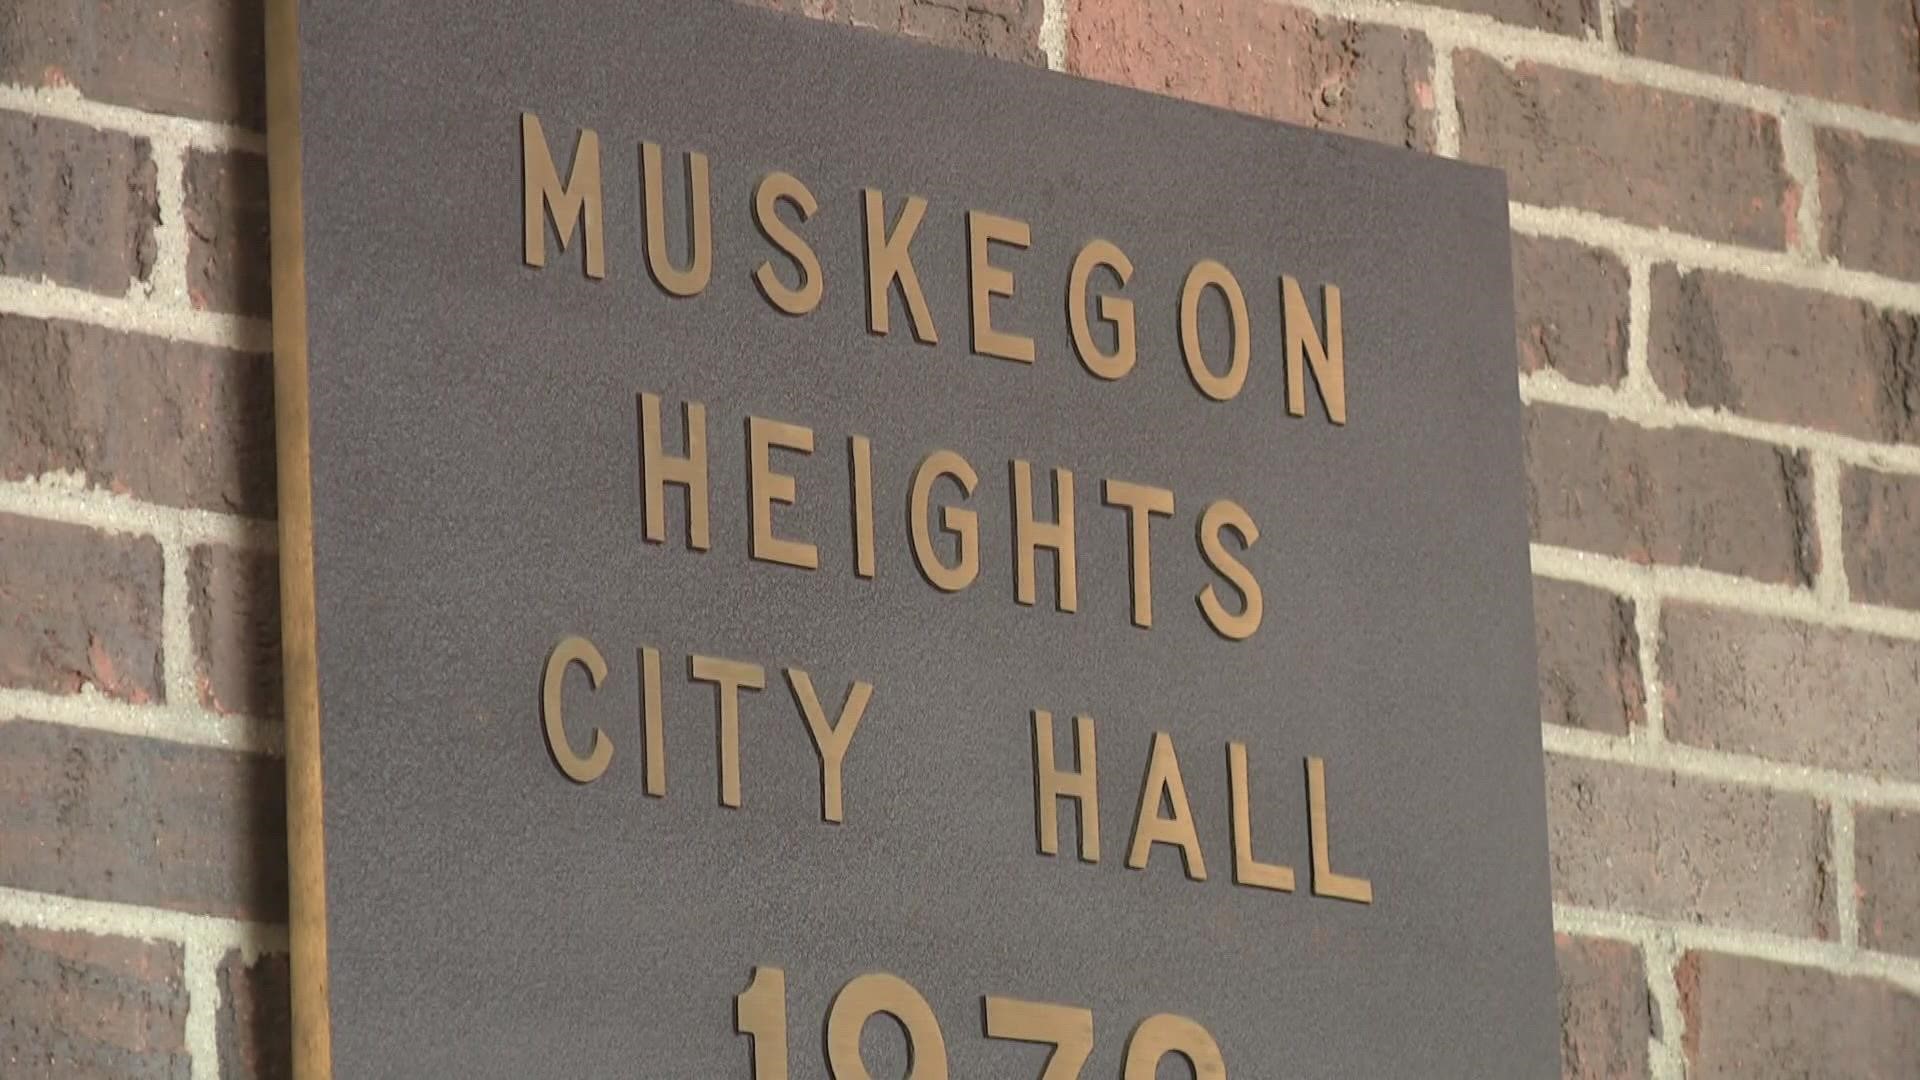 Nearly $11 million in pandemic relief money is coming to Muskegon Heights next year.